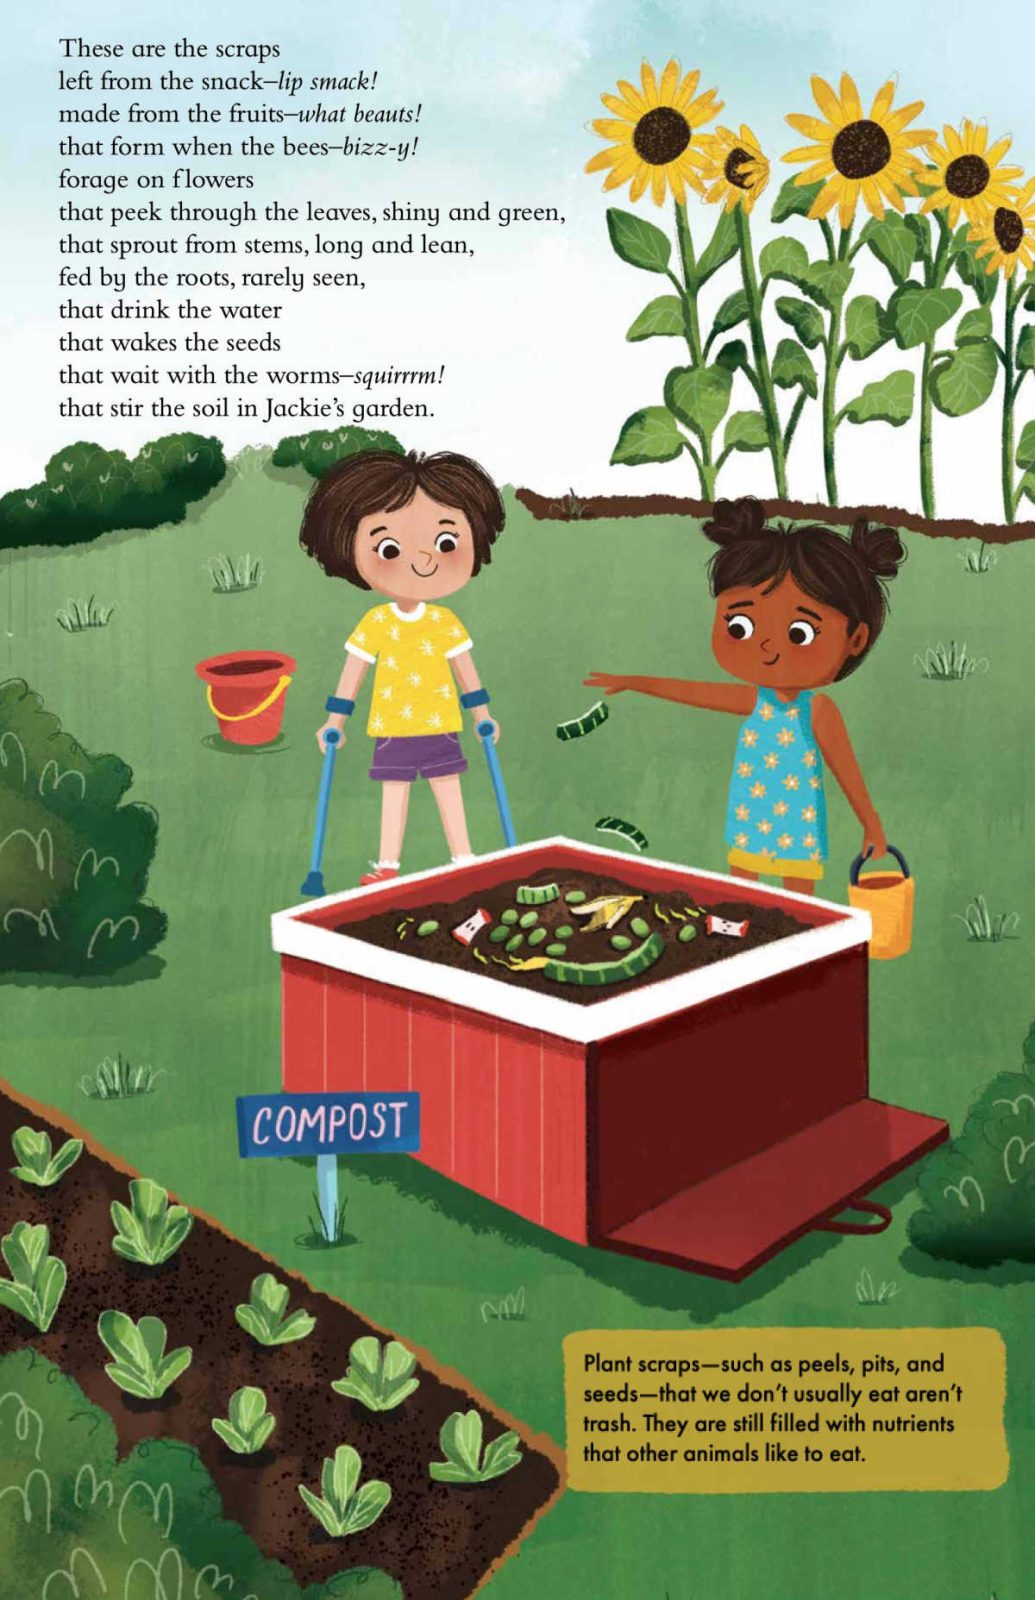 Explore the wonders of soil, watch plants grow, and meet the tiny gardeners that make it all possible in The Soil in Jackie's Garden - a fun, informative story for budding scientists and garden enthusiasts!